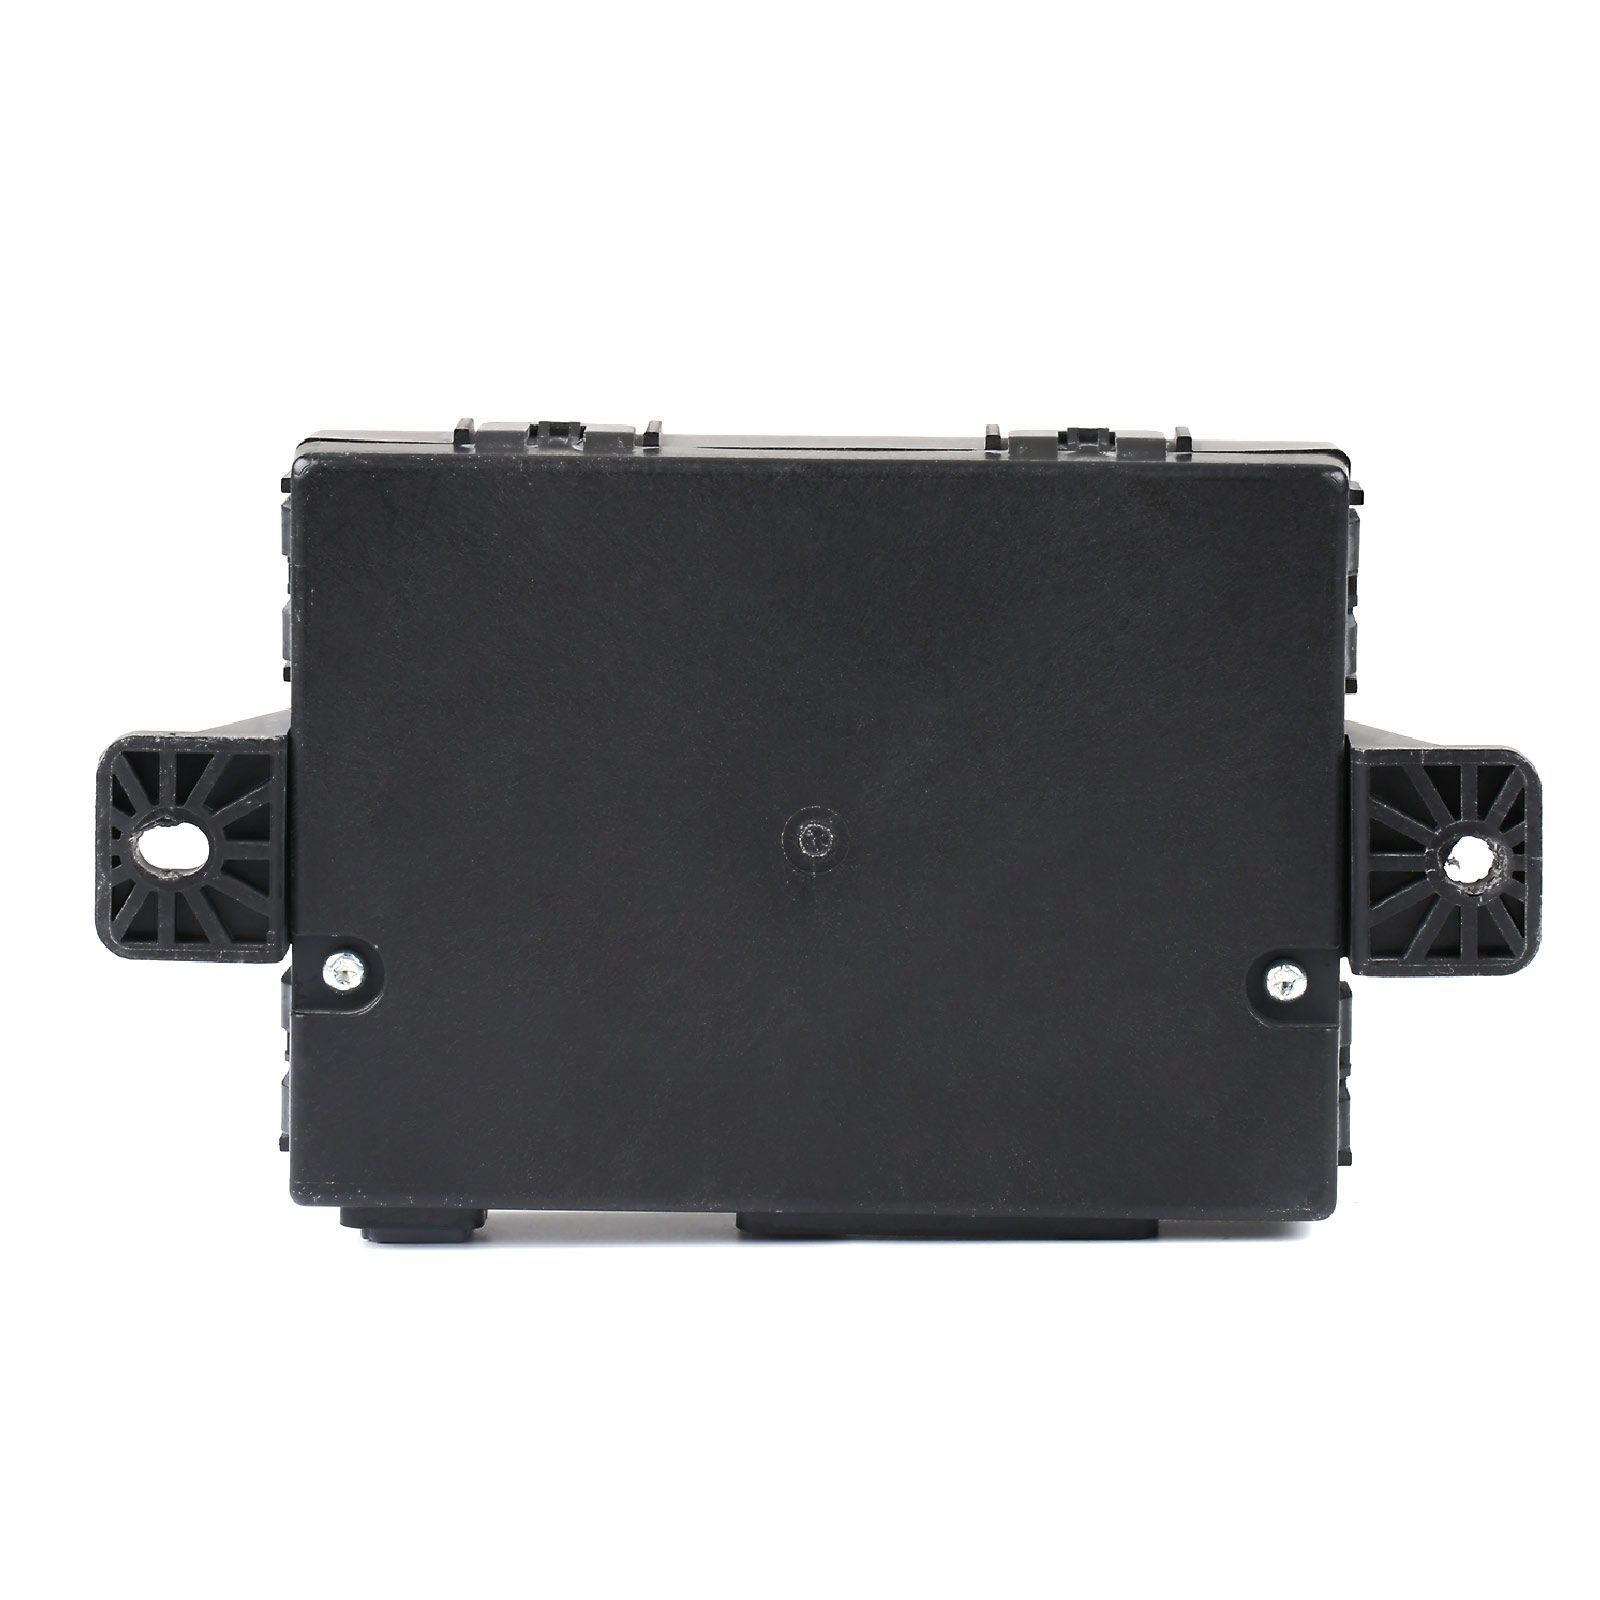 OEM Jaguar Land Rover Blank RFA Module J9C3 without Comfort Access contains SPC560B Chip and Data